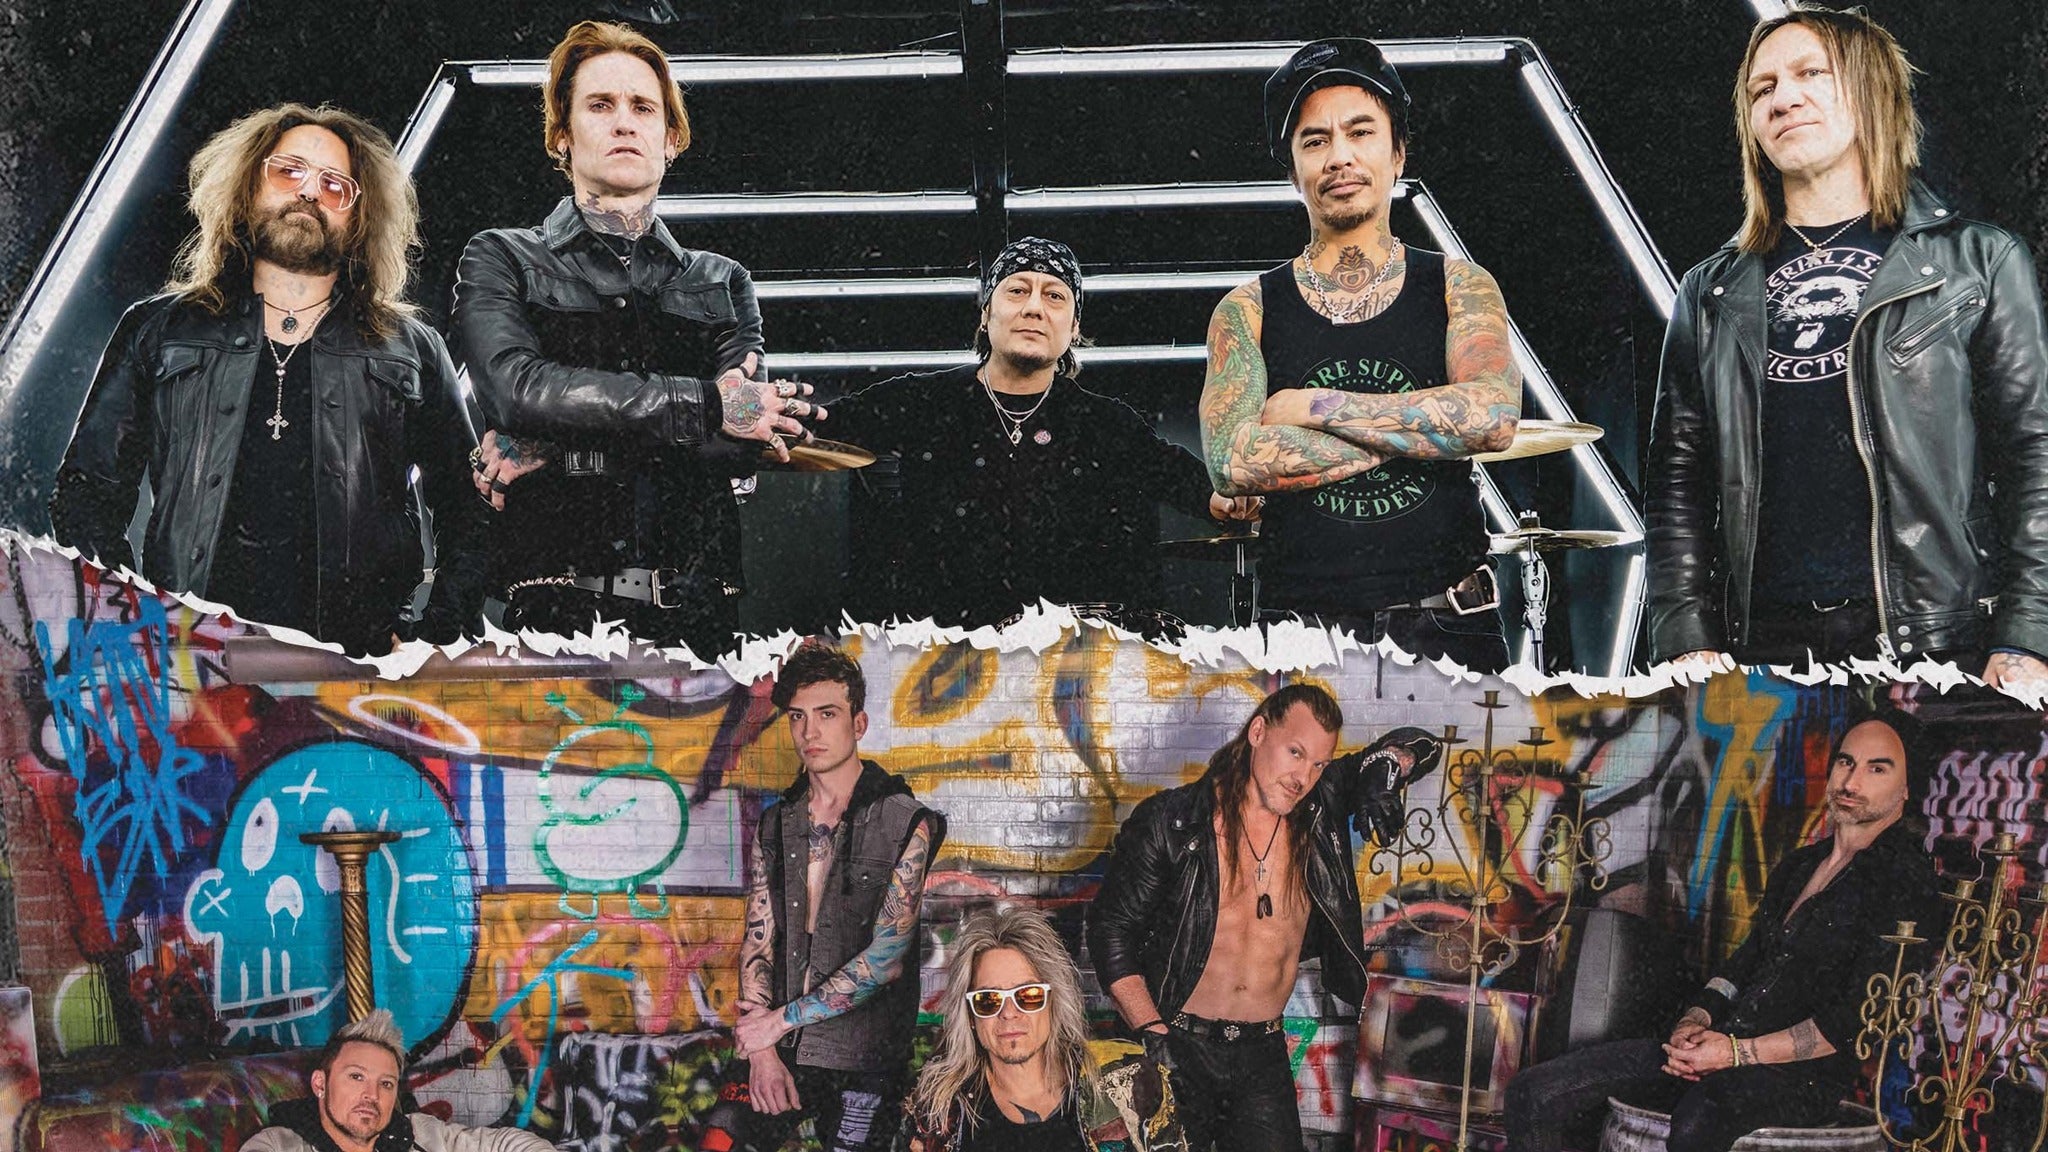 Image used with permission from Ticketmaster | BUCKCHERRY & FOZZY tickets